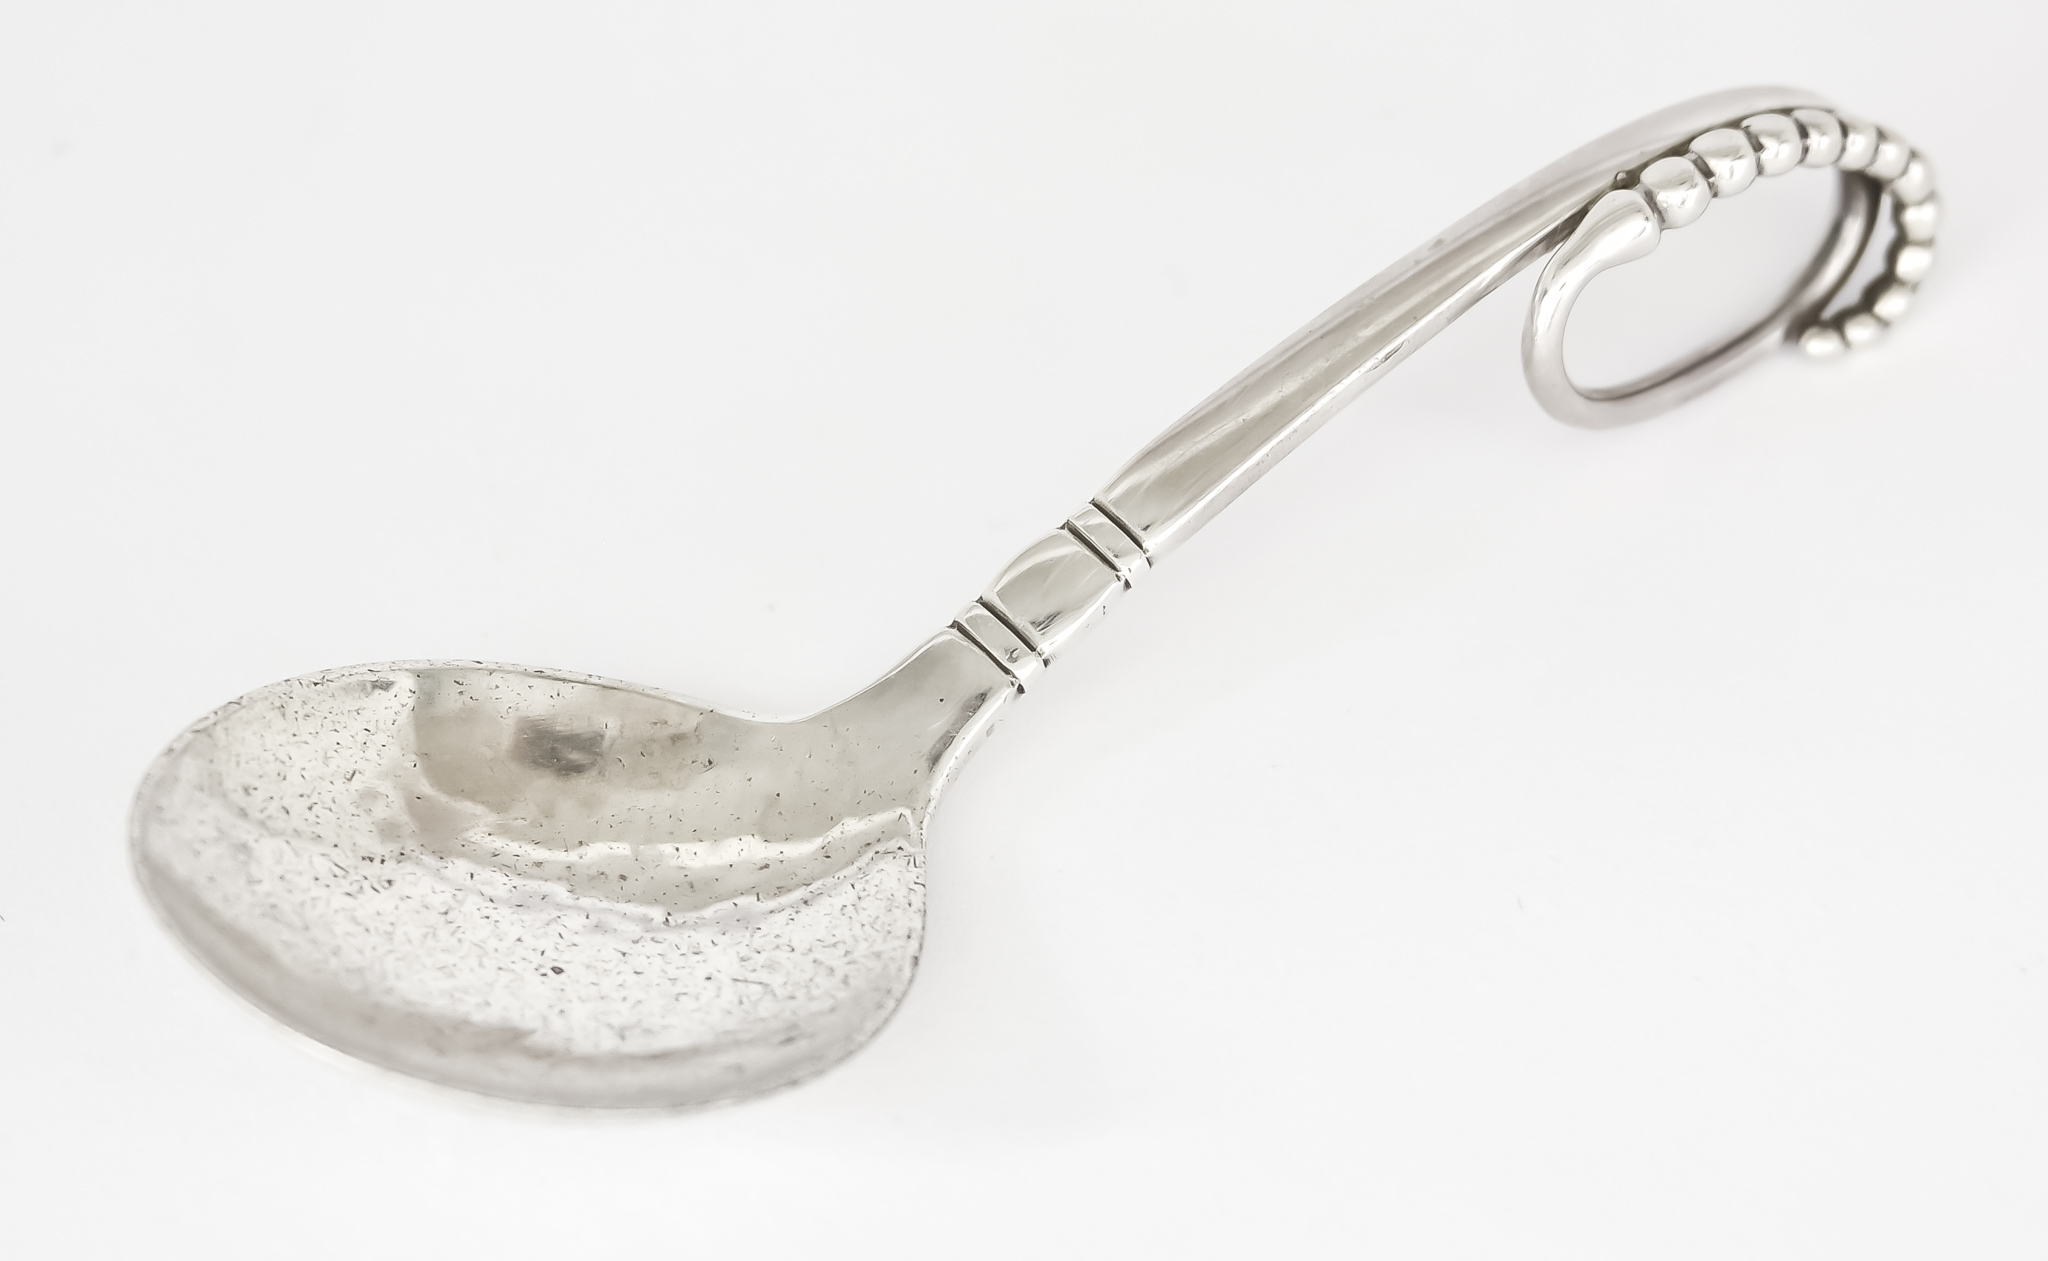 A 20th Century Danish Silver Caddy Spoon, by Georg Jensen, with import mark for London, 1967,